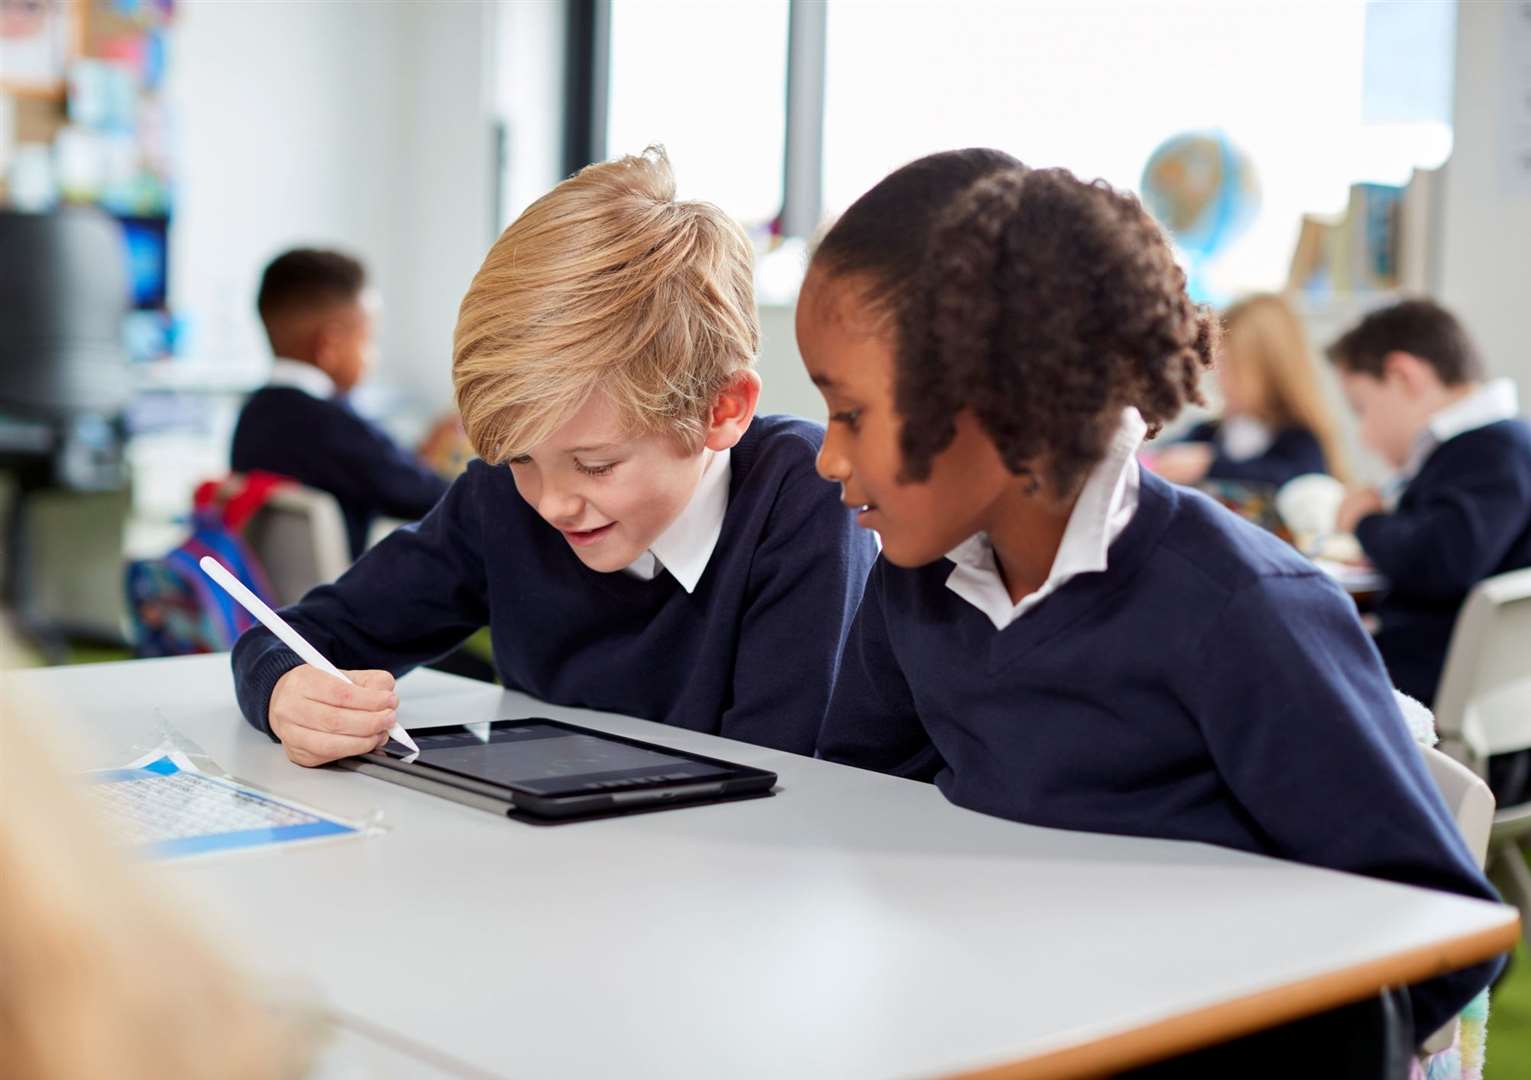 Children going to secondary school in September will be given their place on March 1. Image: iStock.